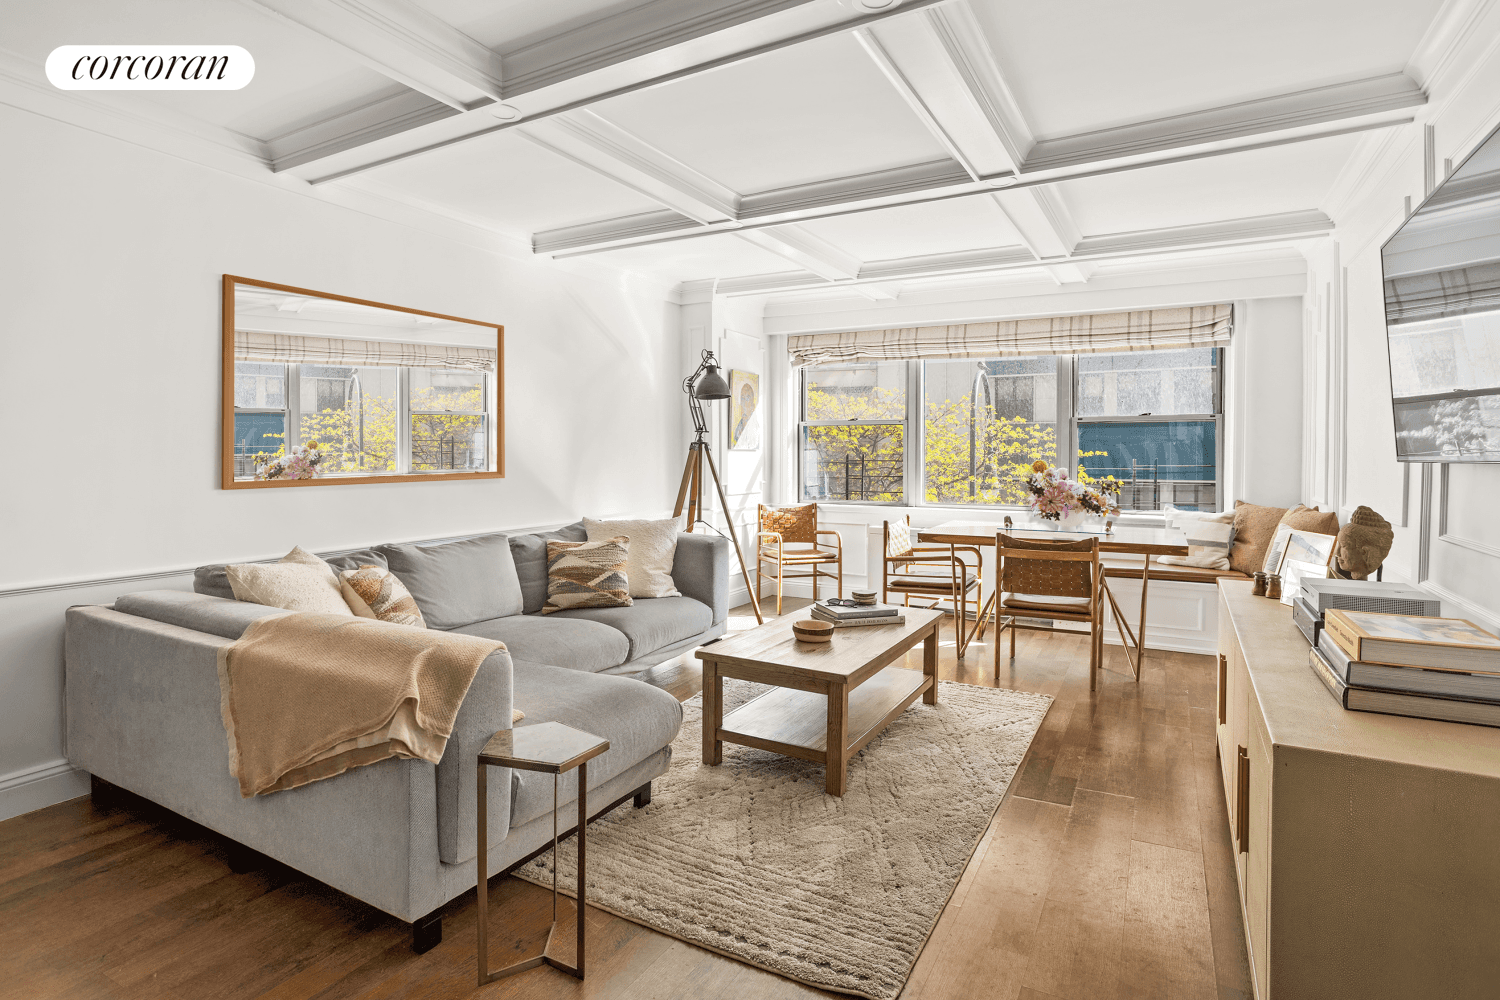 Nestled within the heart of downtown Manhattan, this spacious two bedroom, one and a half bathroom apartment offers an expansive living experience.